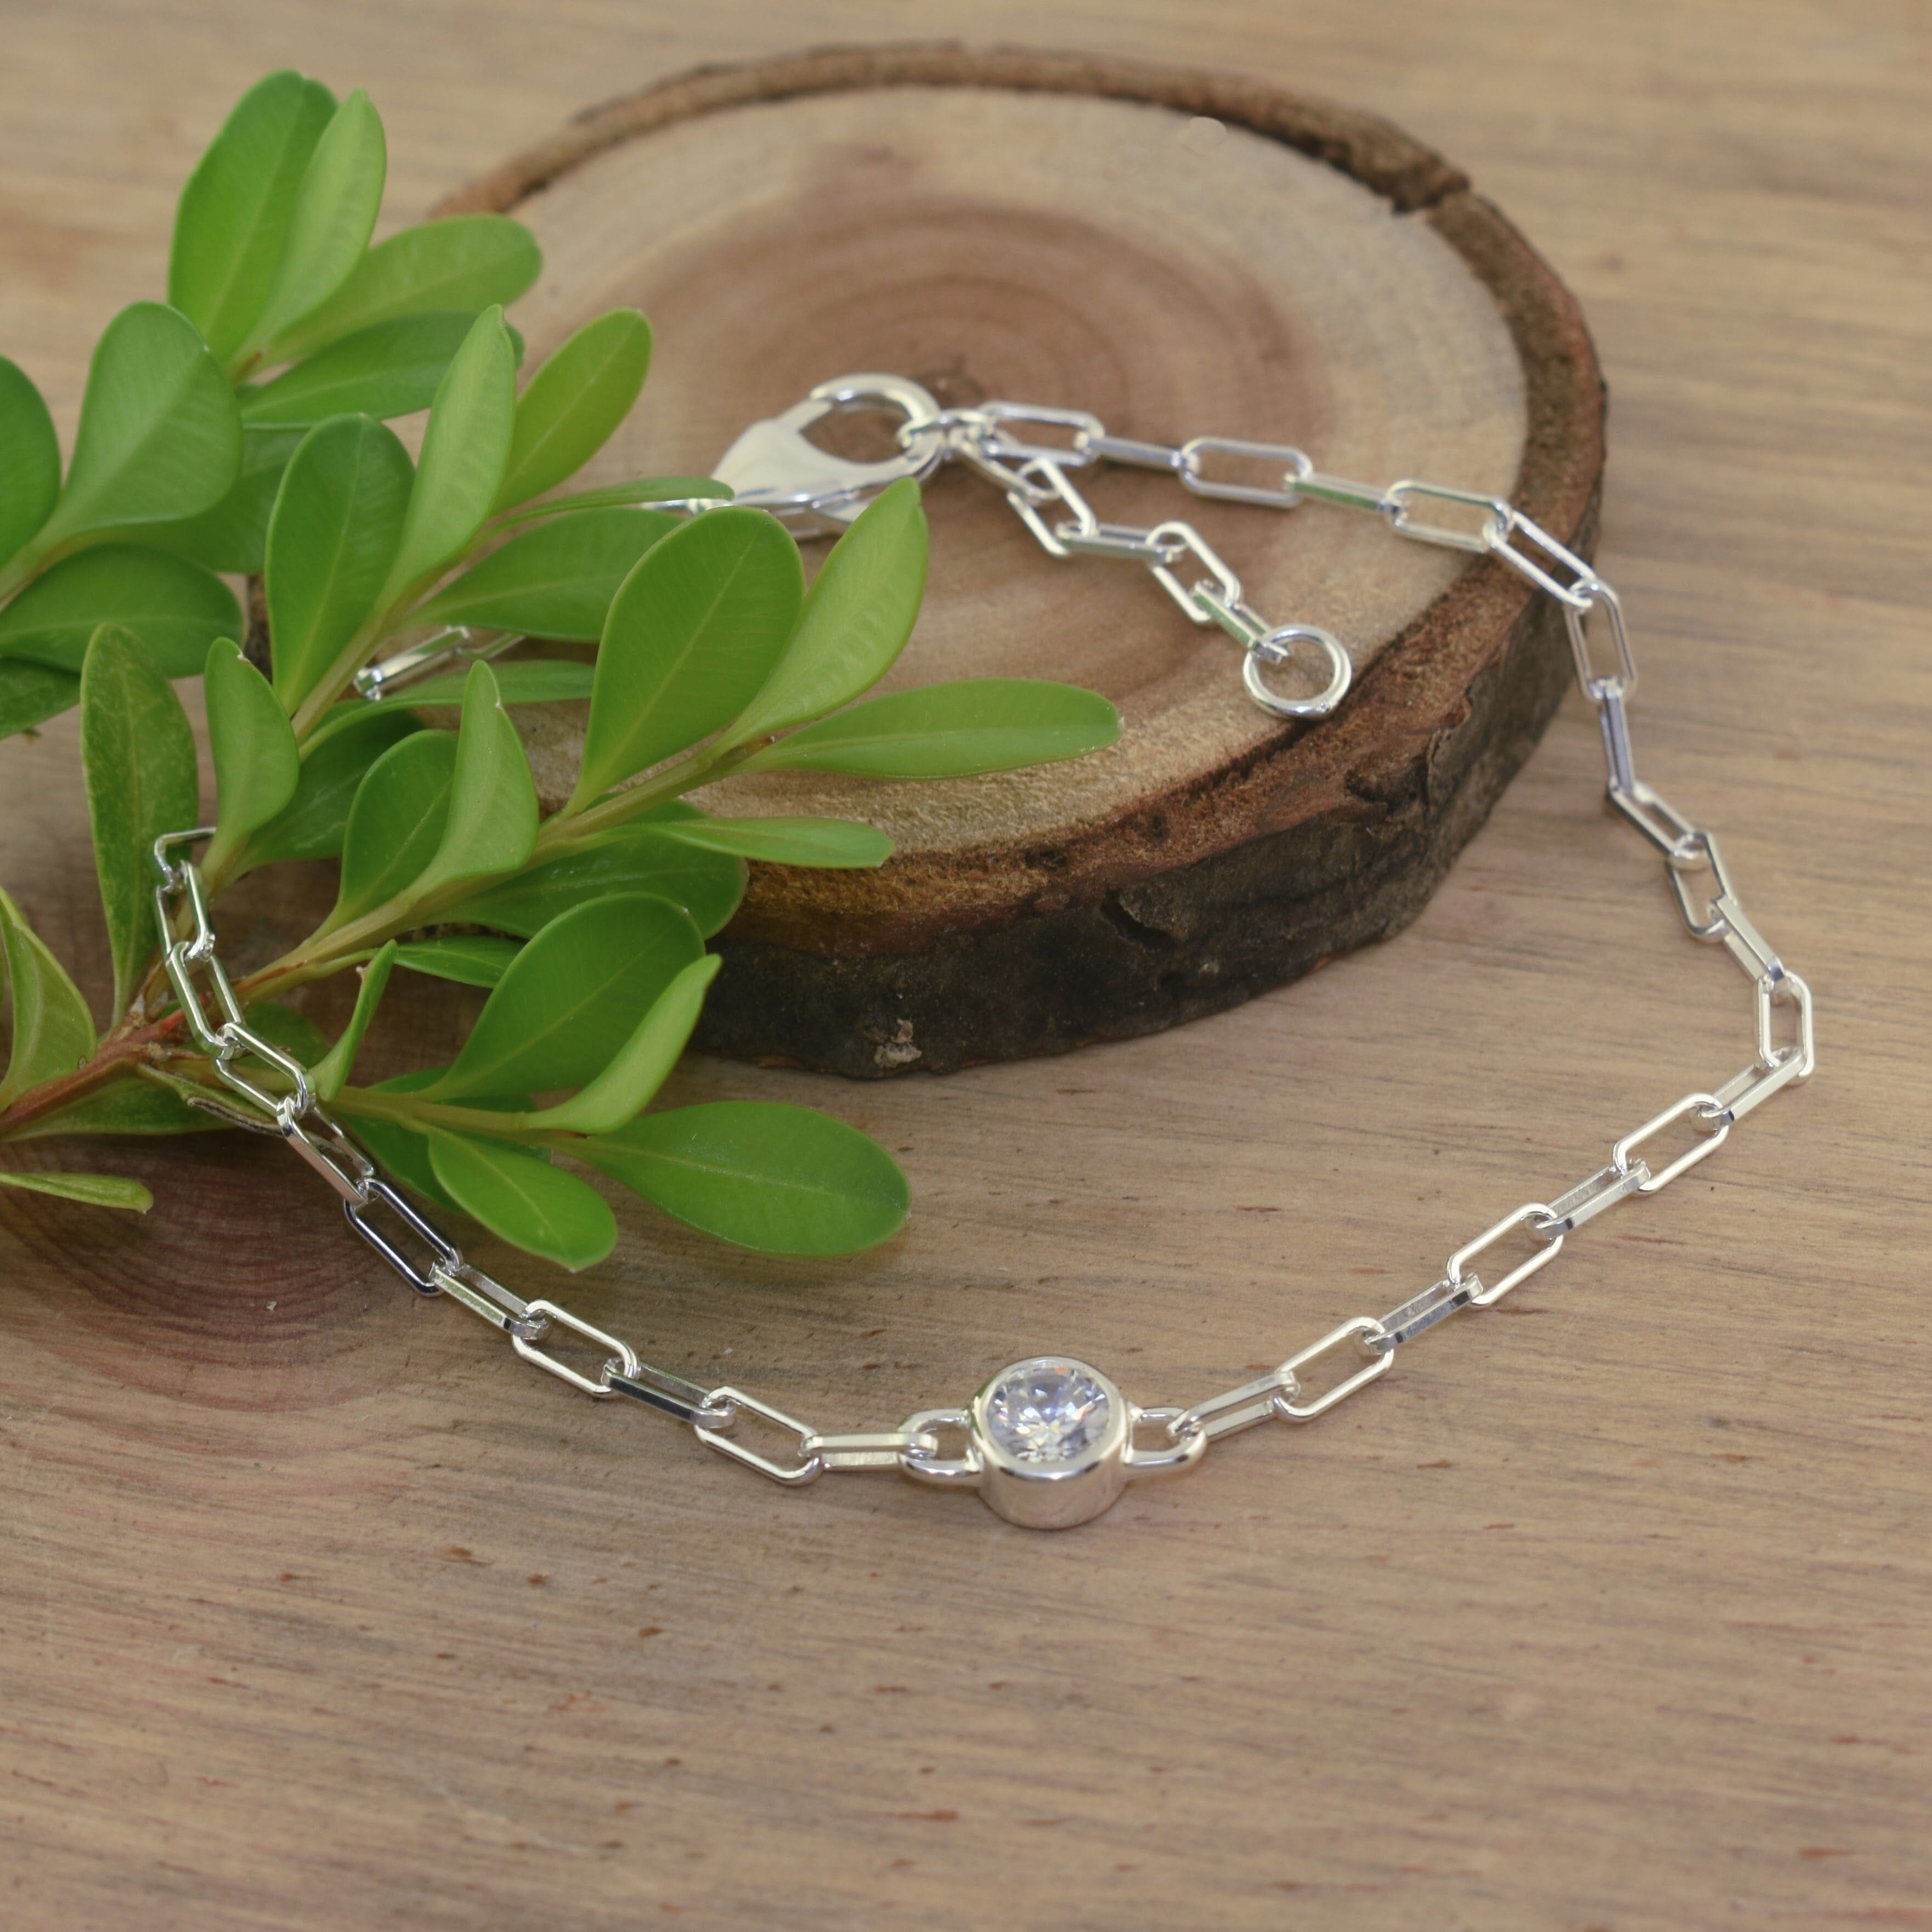 Dainty sterling silver paperclip chain bracelet with single cubic zirconia stone